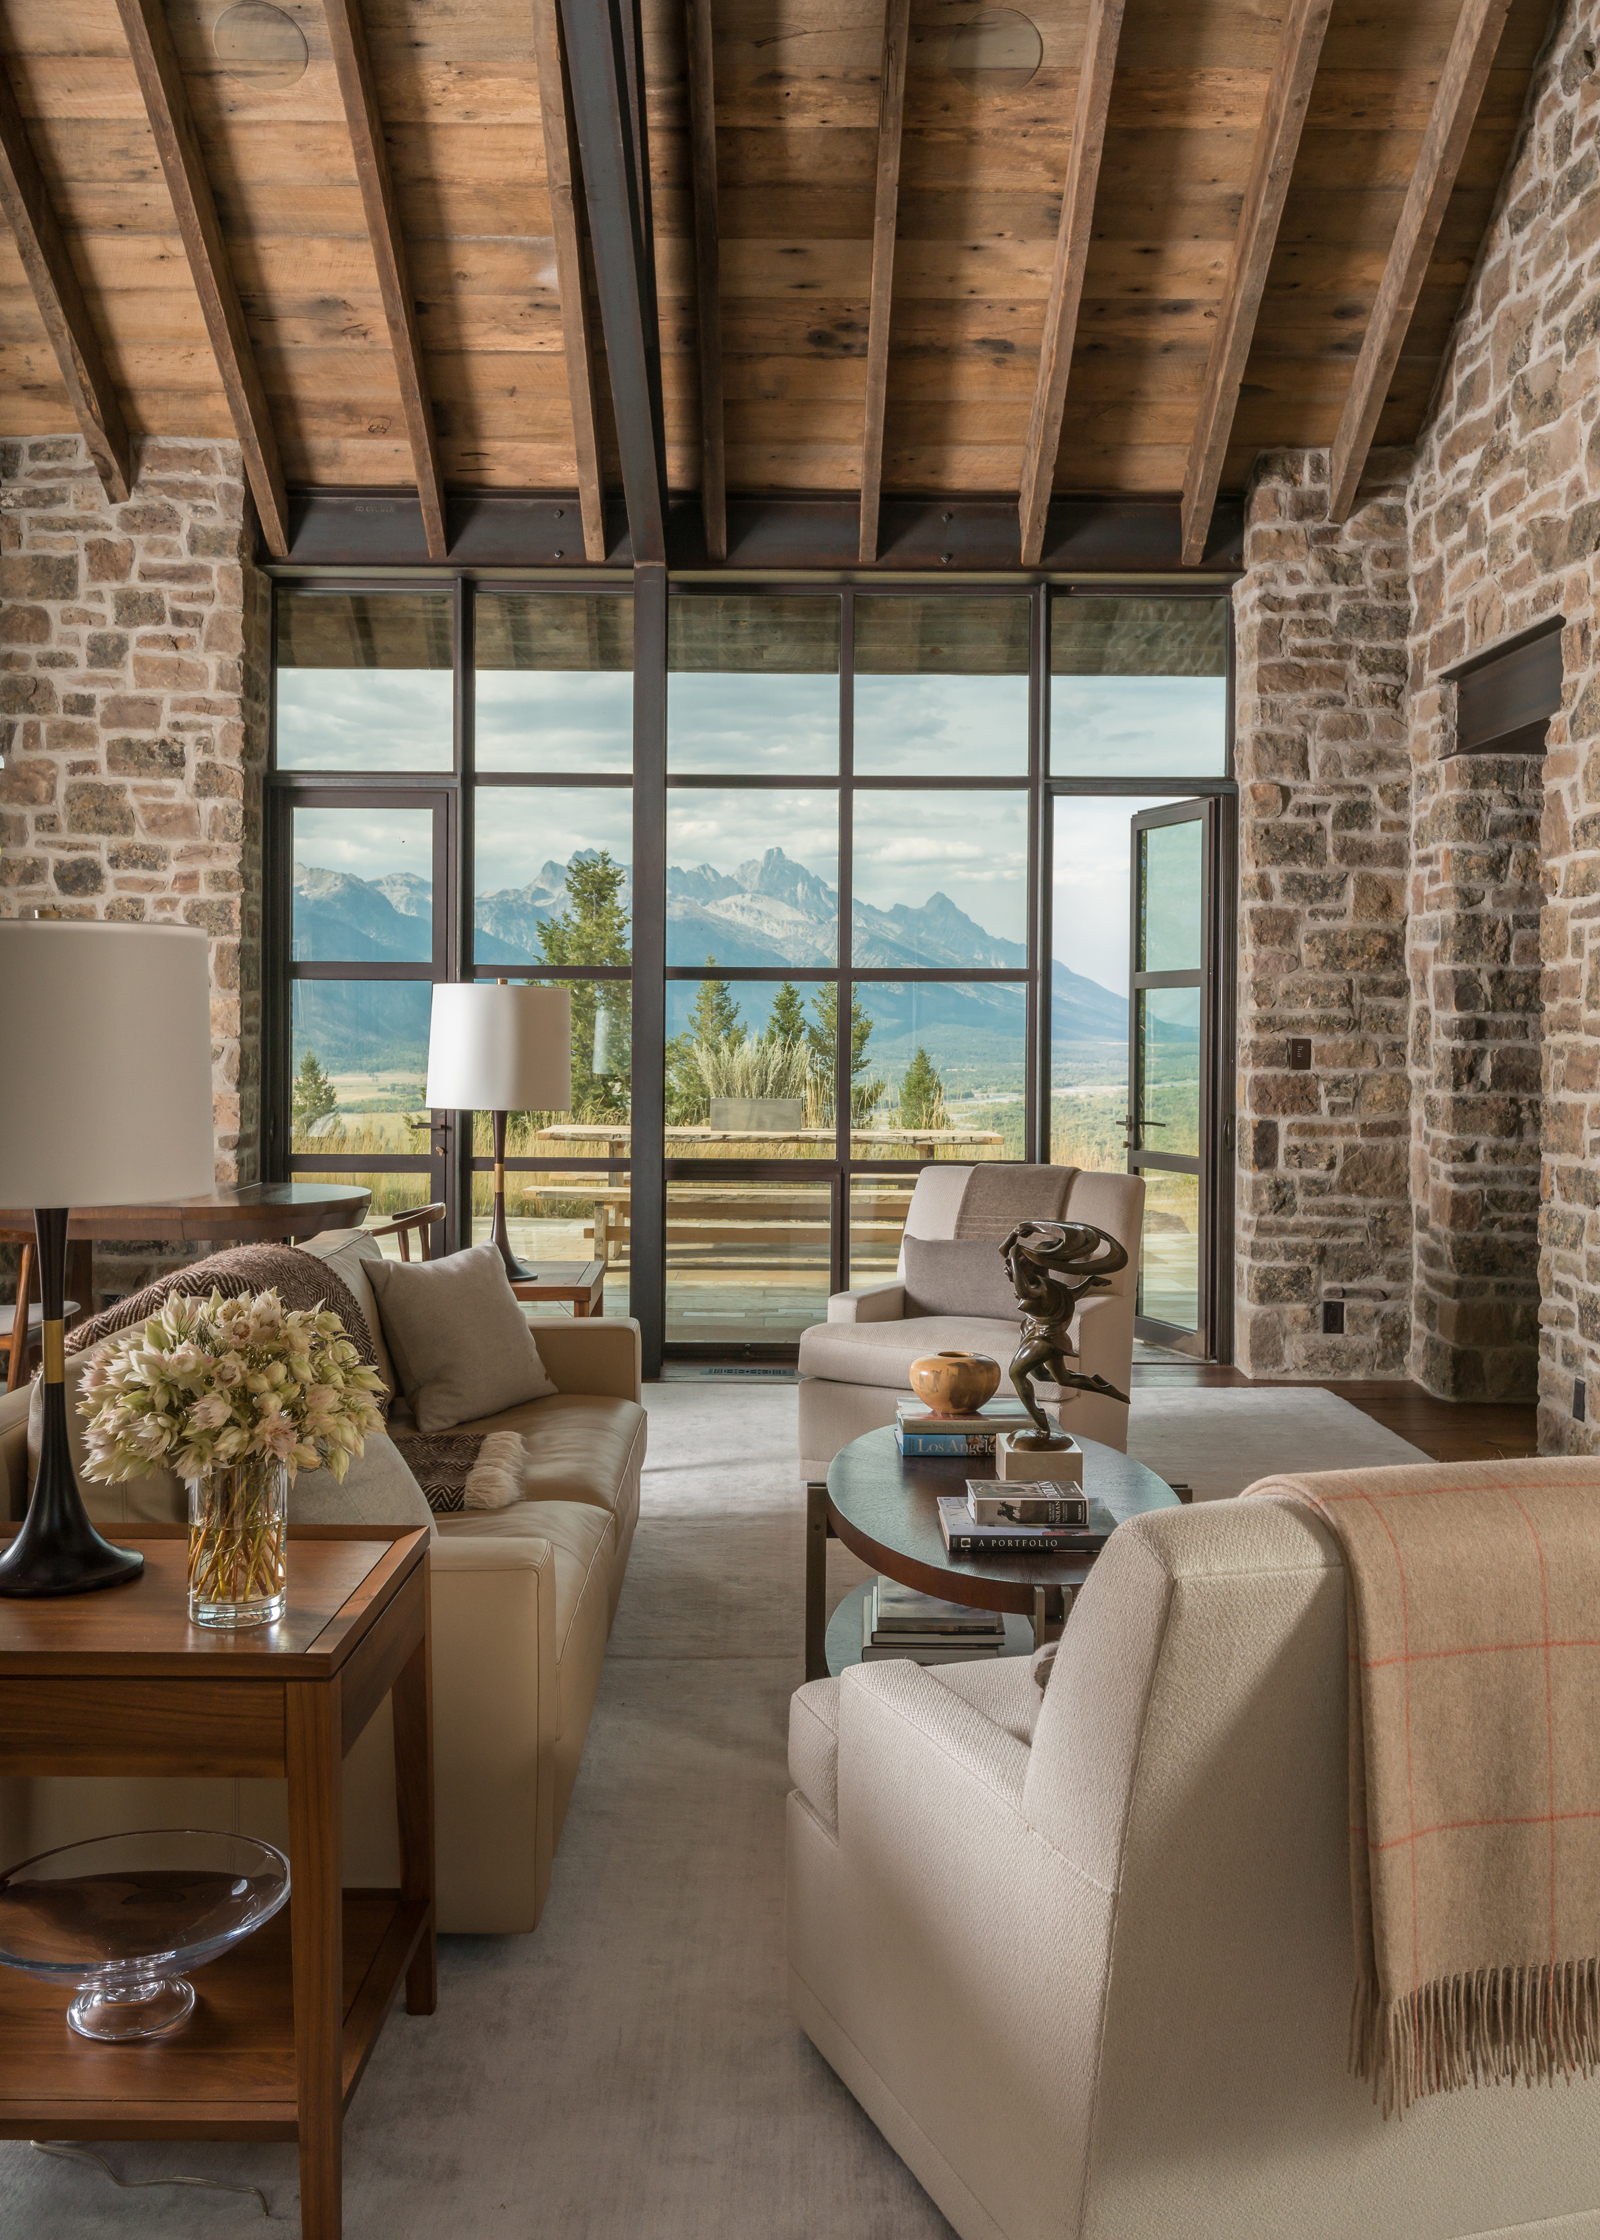 This Home of the Year Award-winning house by JLF Architects and WRJ Design is a contemporary homestead in Jackson Hole (photo by Audrey Hall; not from “Natural Elegance” book).